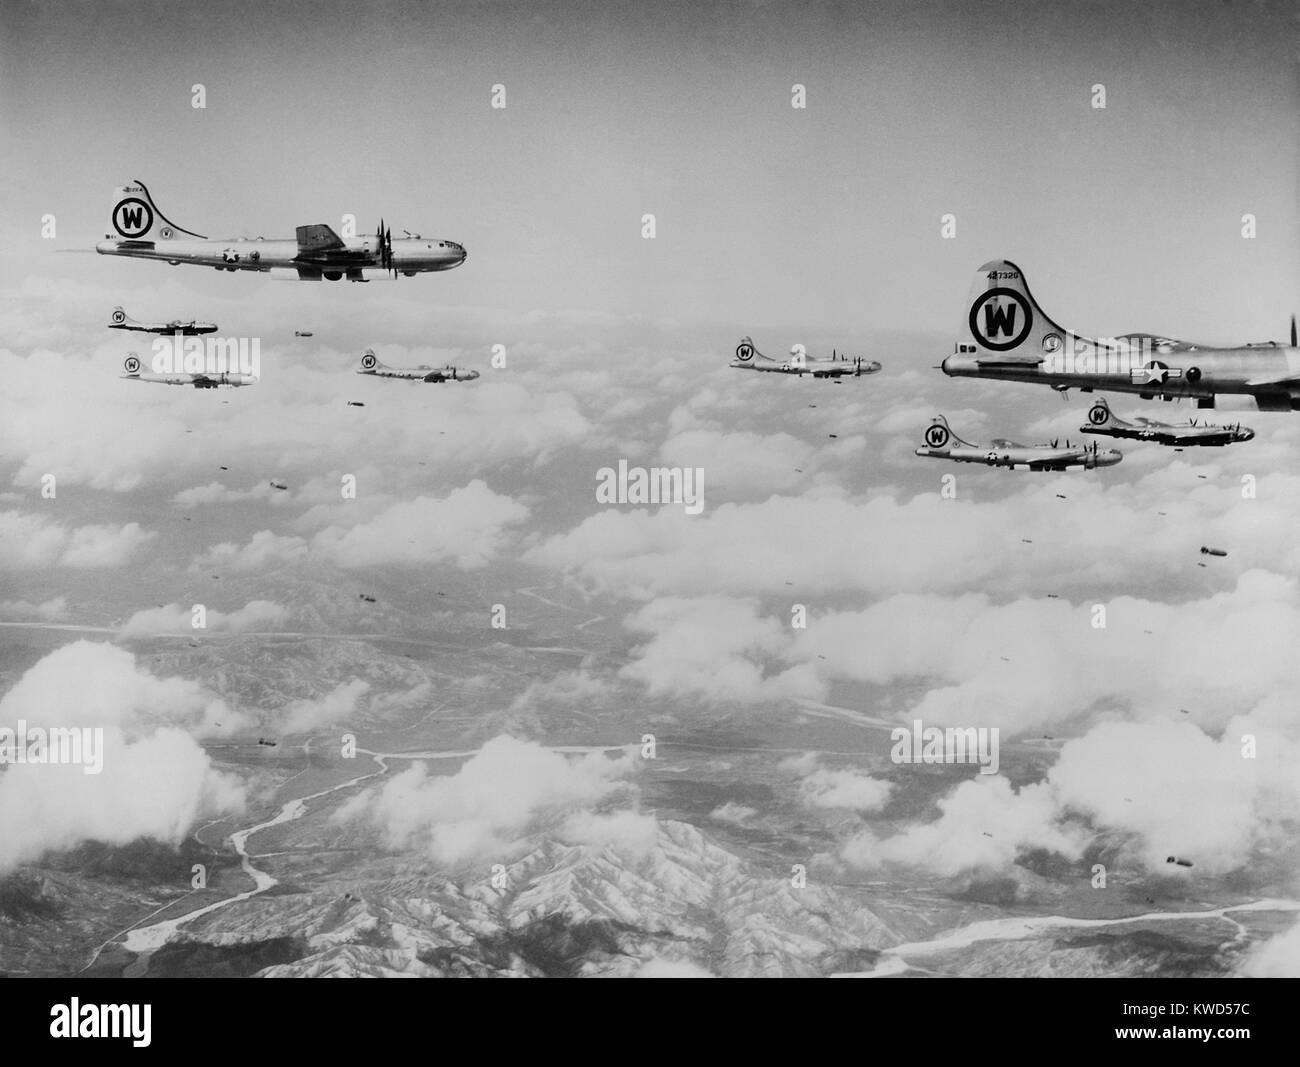 B-29s formation is shown dropping bombs over enemy territory in Korea. At first North Korea's strategic targets and industries bombed by daylight. Losses to MiG Jet fighters eventually restricted B-29s to night-only missions. Korean War, 1950-53. (BSLOC 2014 11 220) Stock Photo